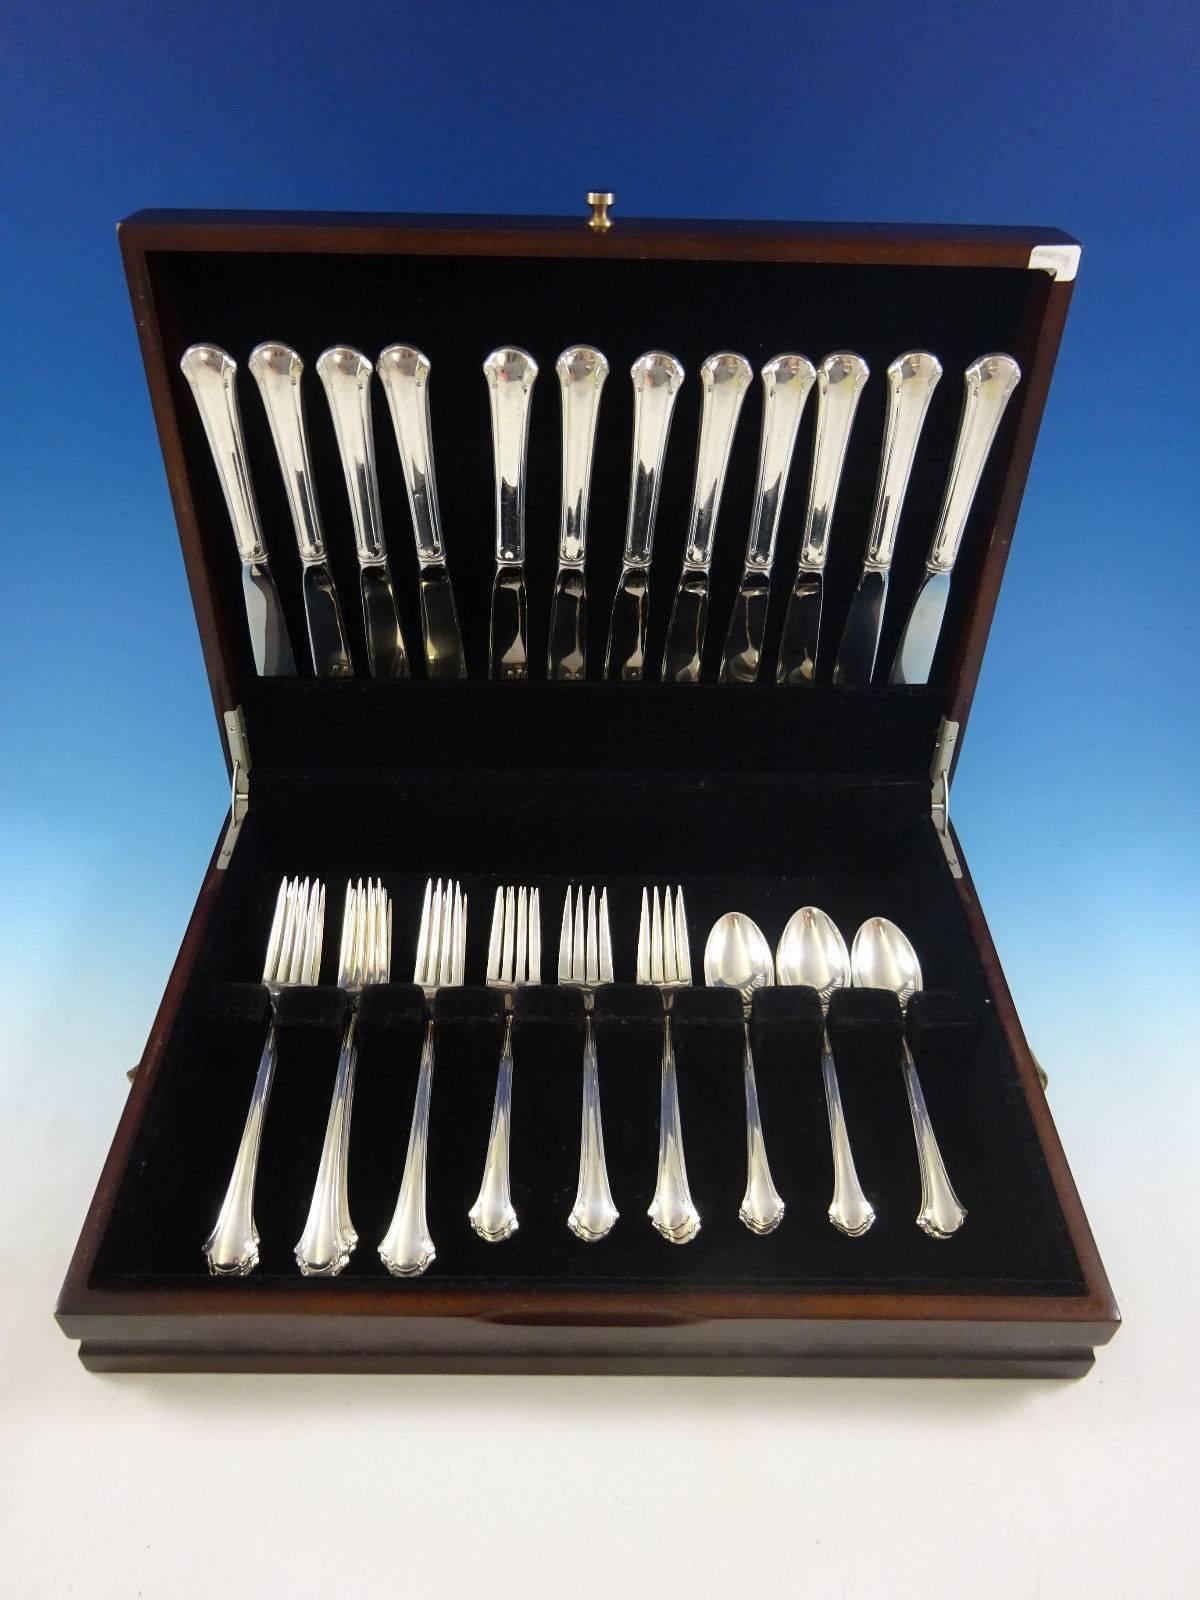 Chippendale by Towle sterling silver flatware set, 48 pieces. This set includes: 

12 knives, 8 3/4